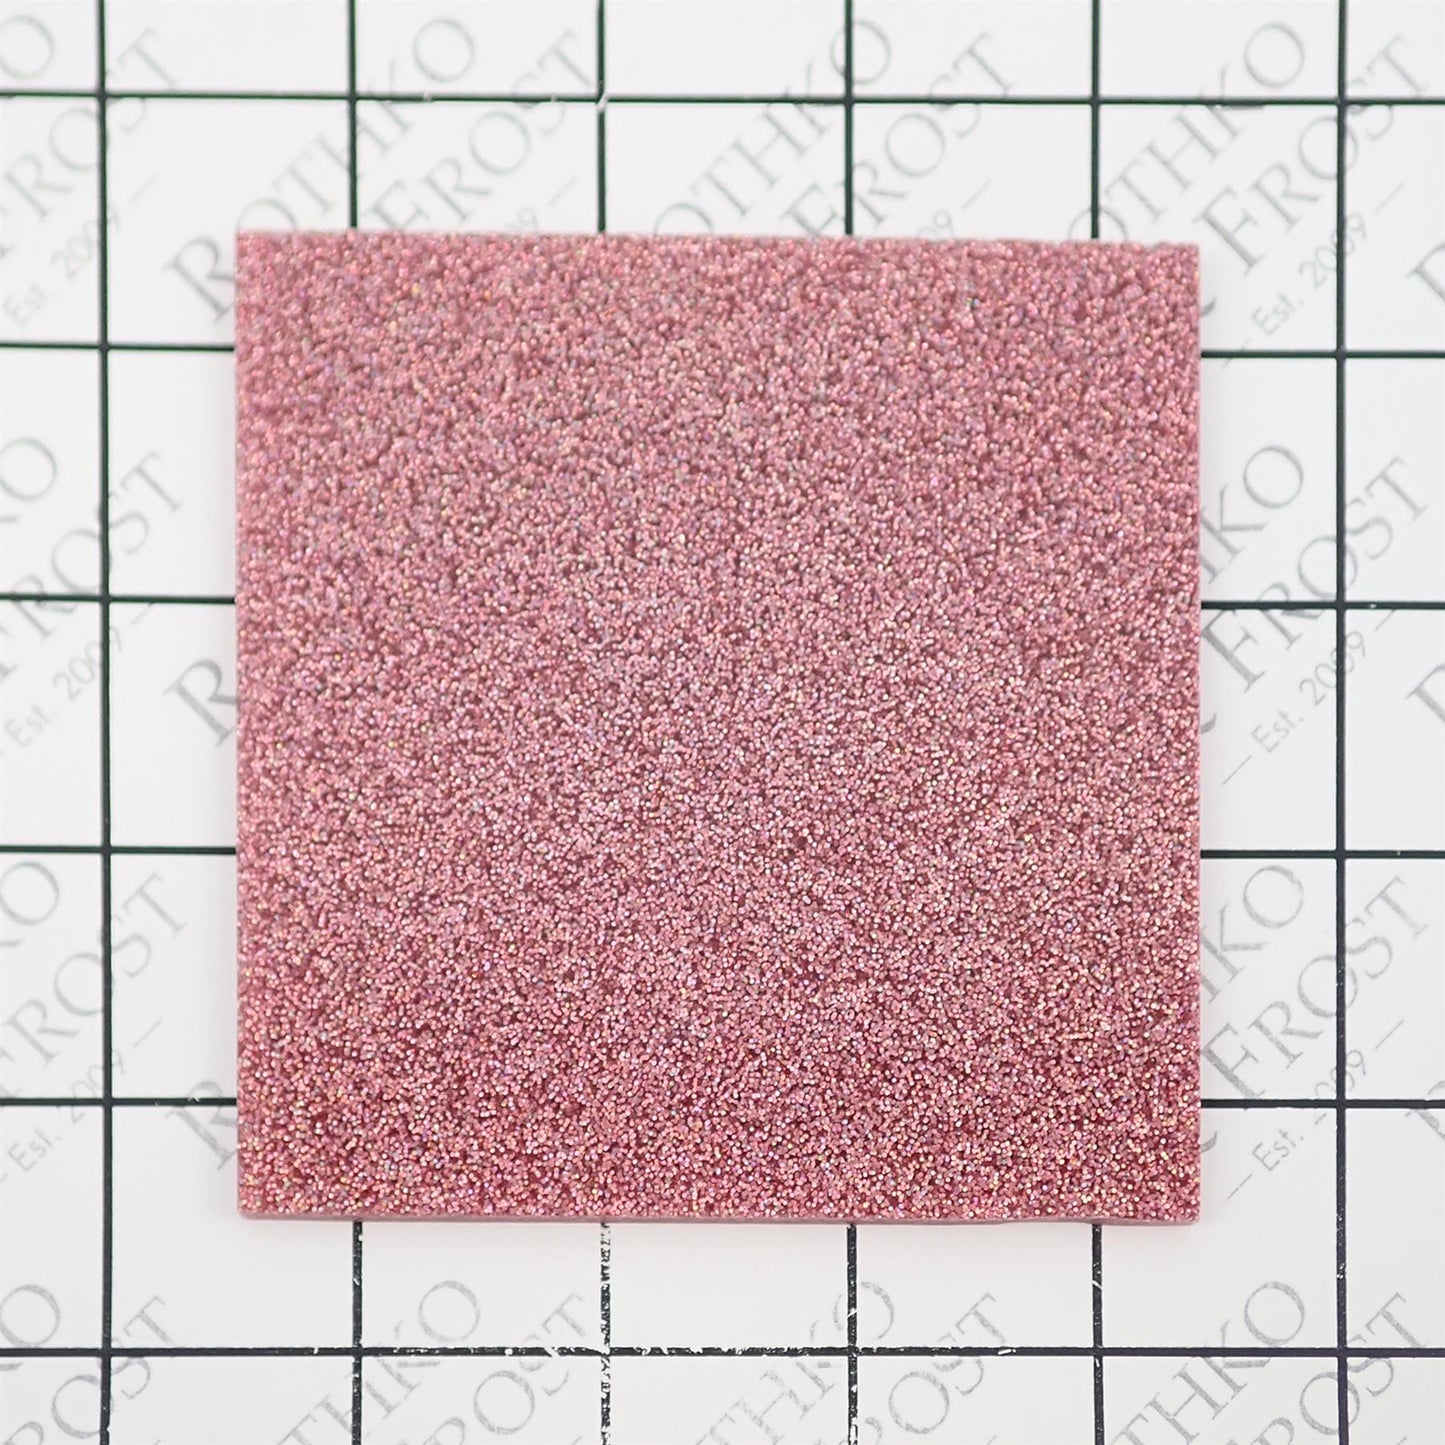 Incudo Golden Pink 2-Sided Holographic Glitter Acrylic Sheet - 300x200x3mm (11.8x7.87x0.12")